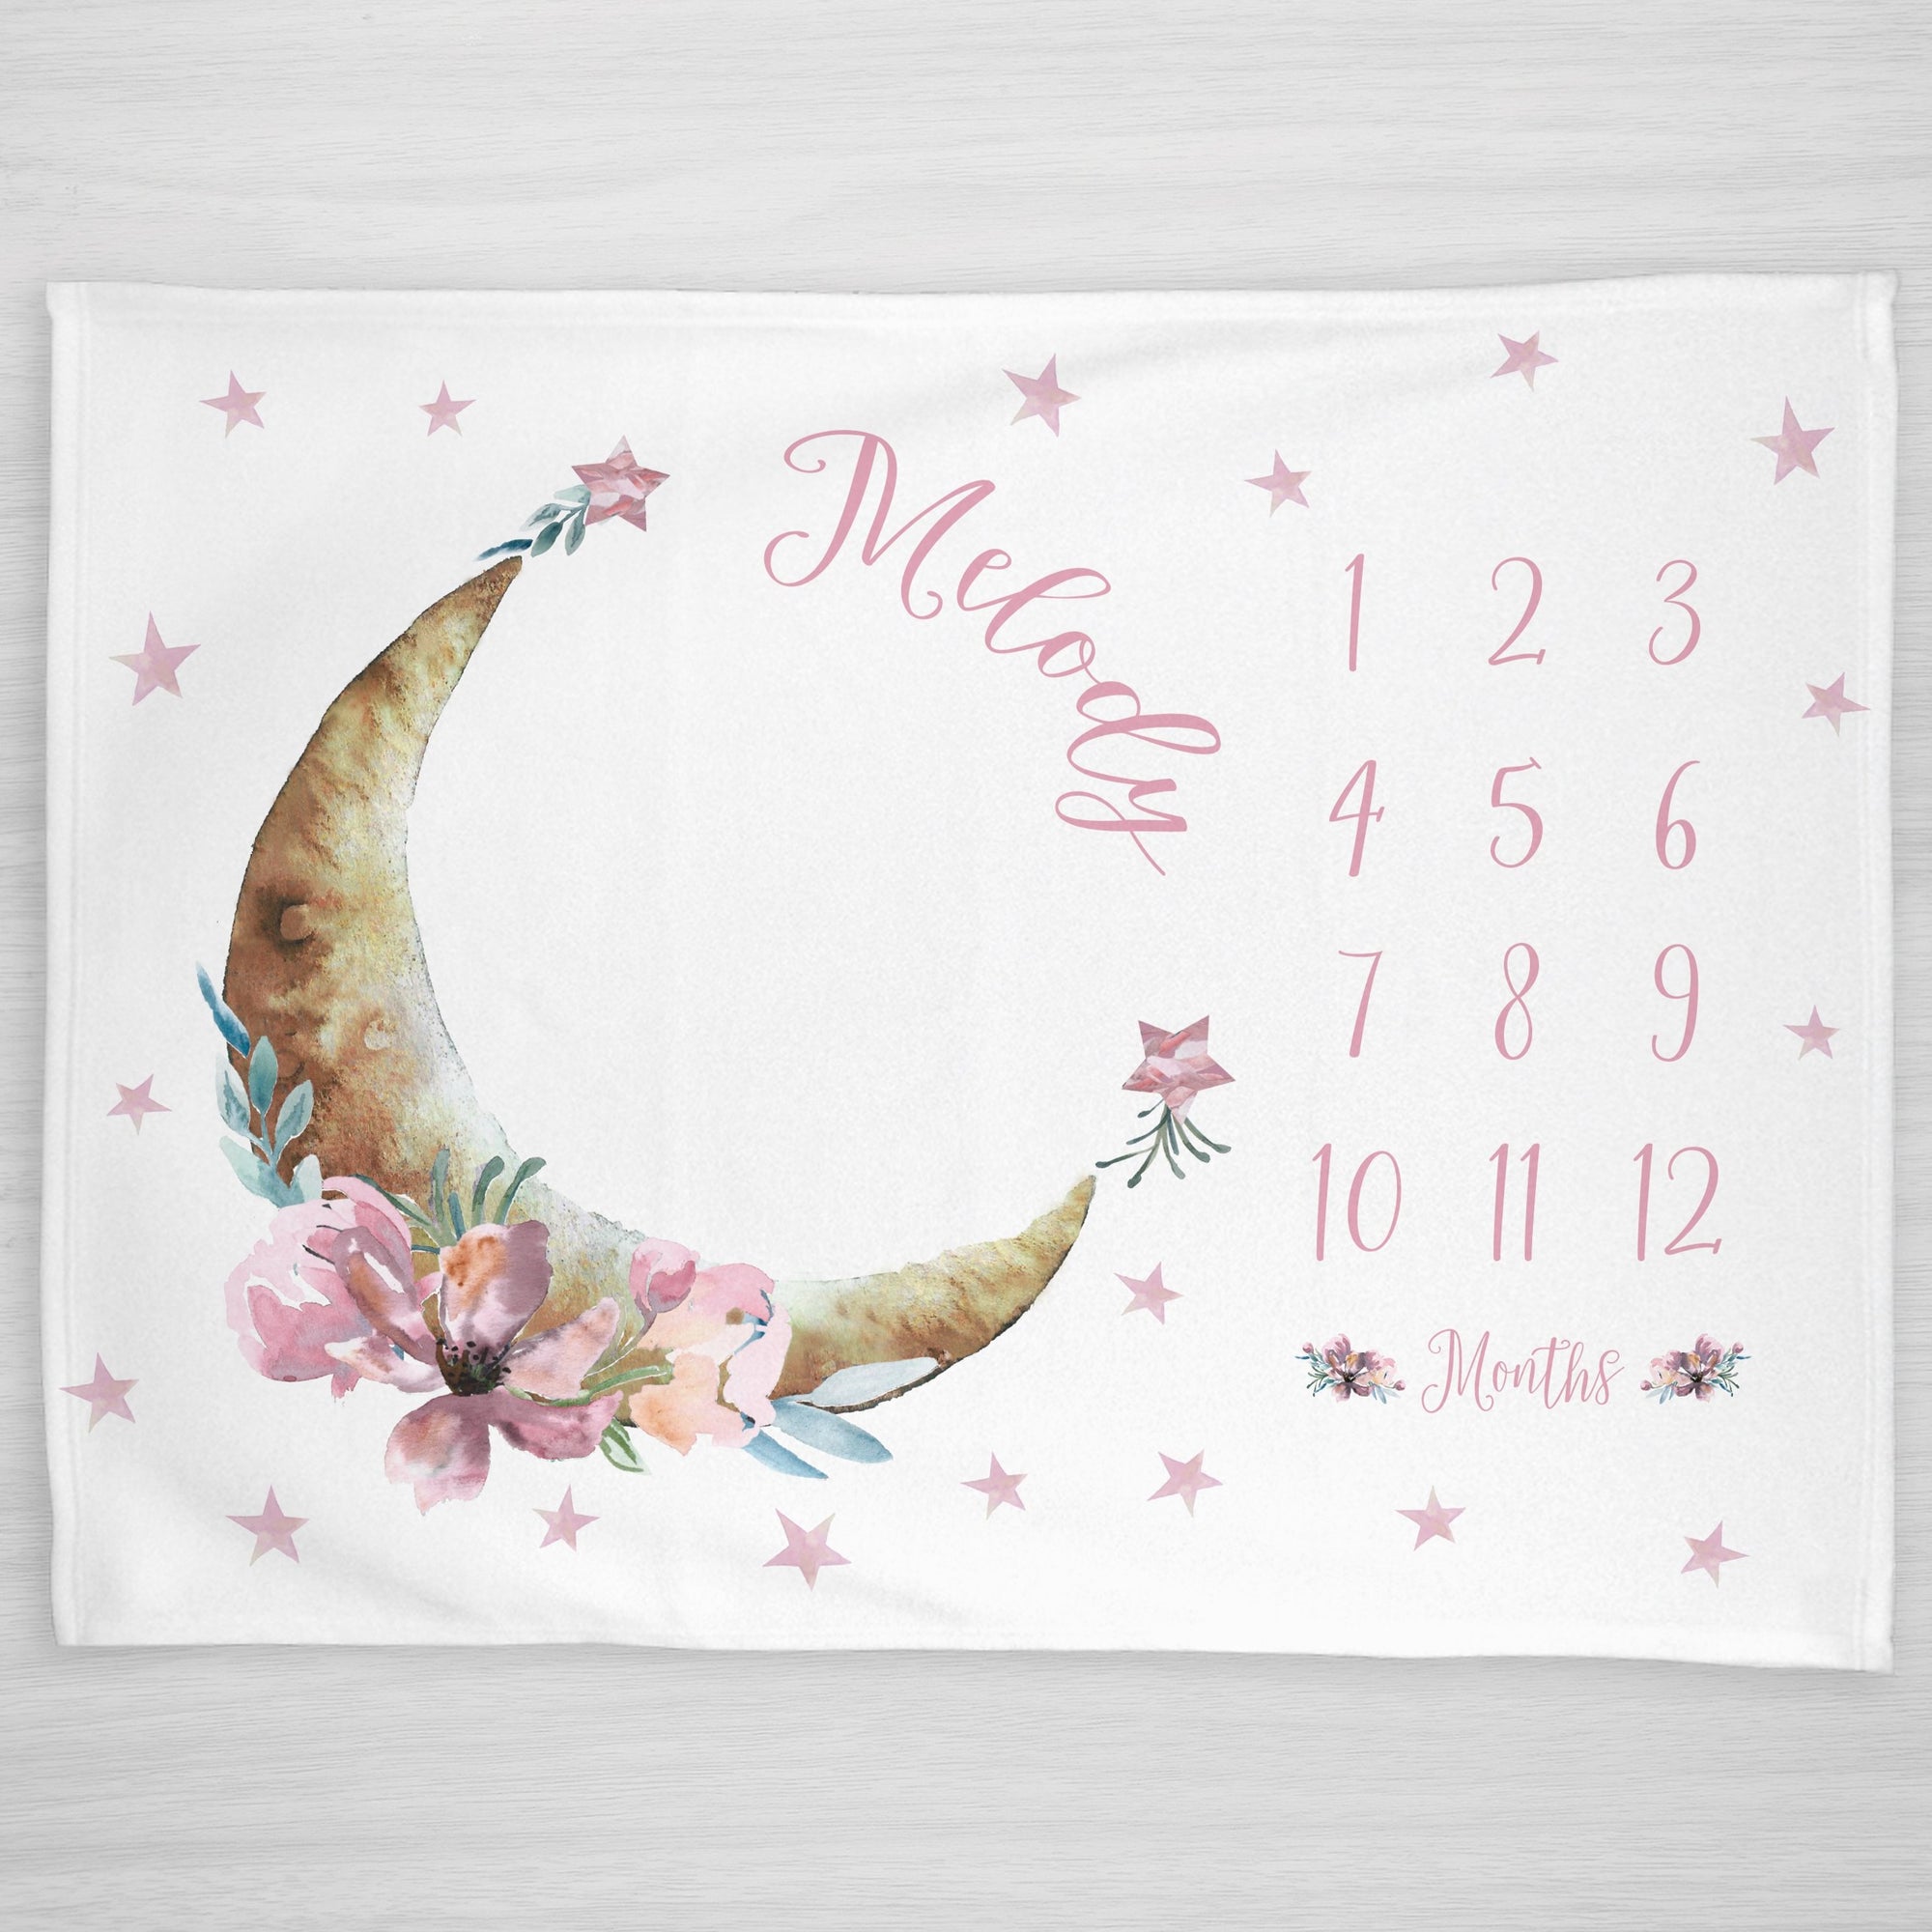 Moon and Stars Milestone Blanket | Gold and blush colors |Landscape | Pipsy.com